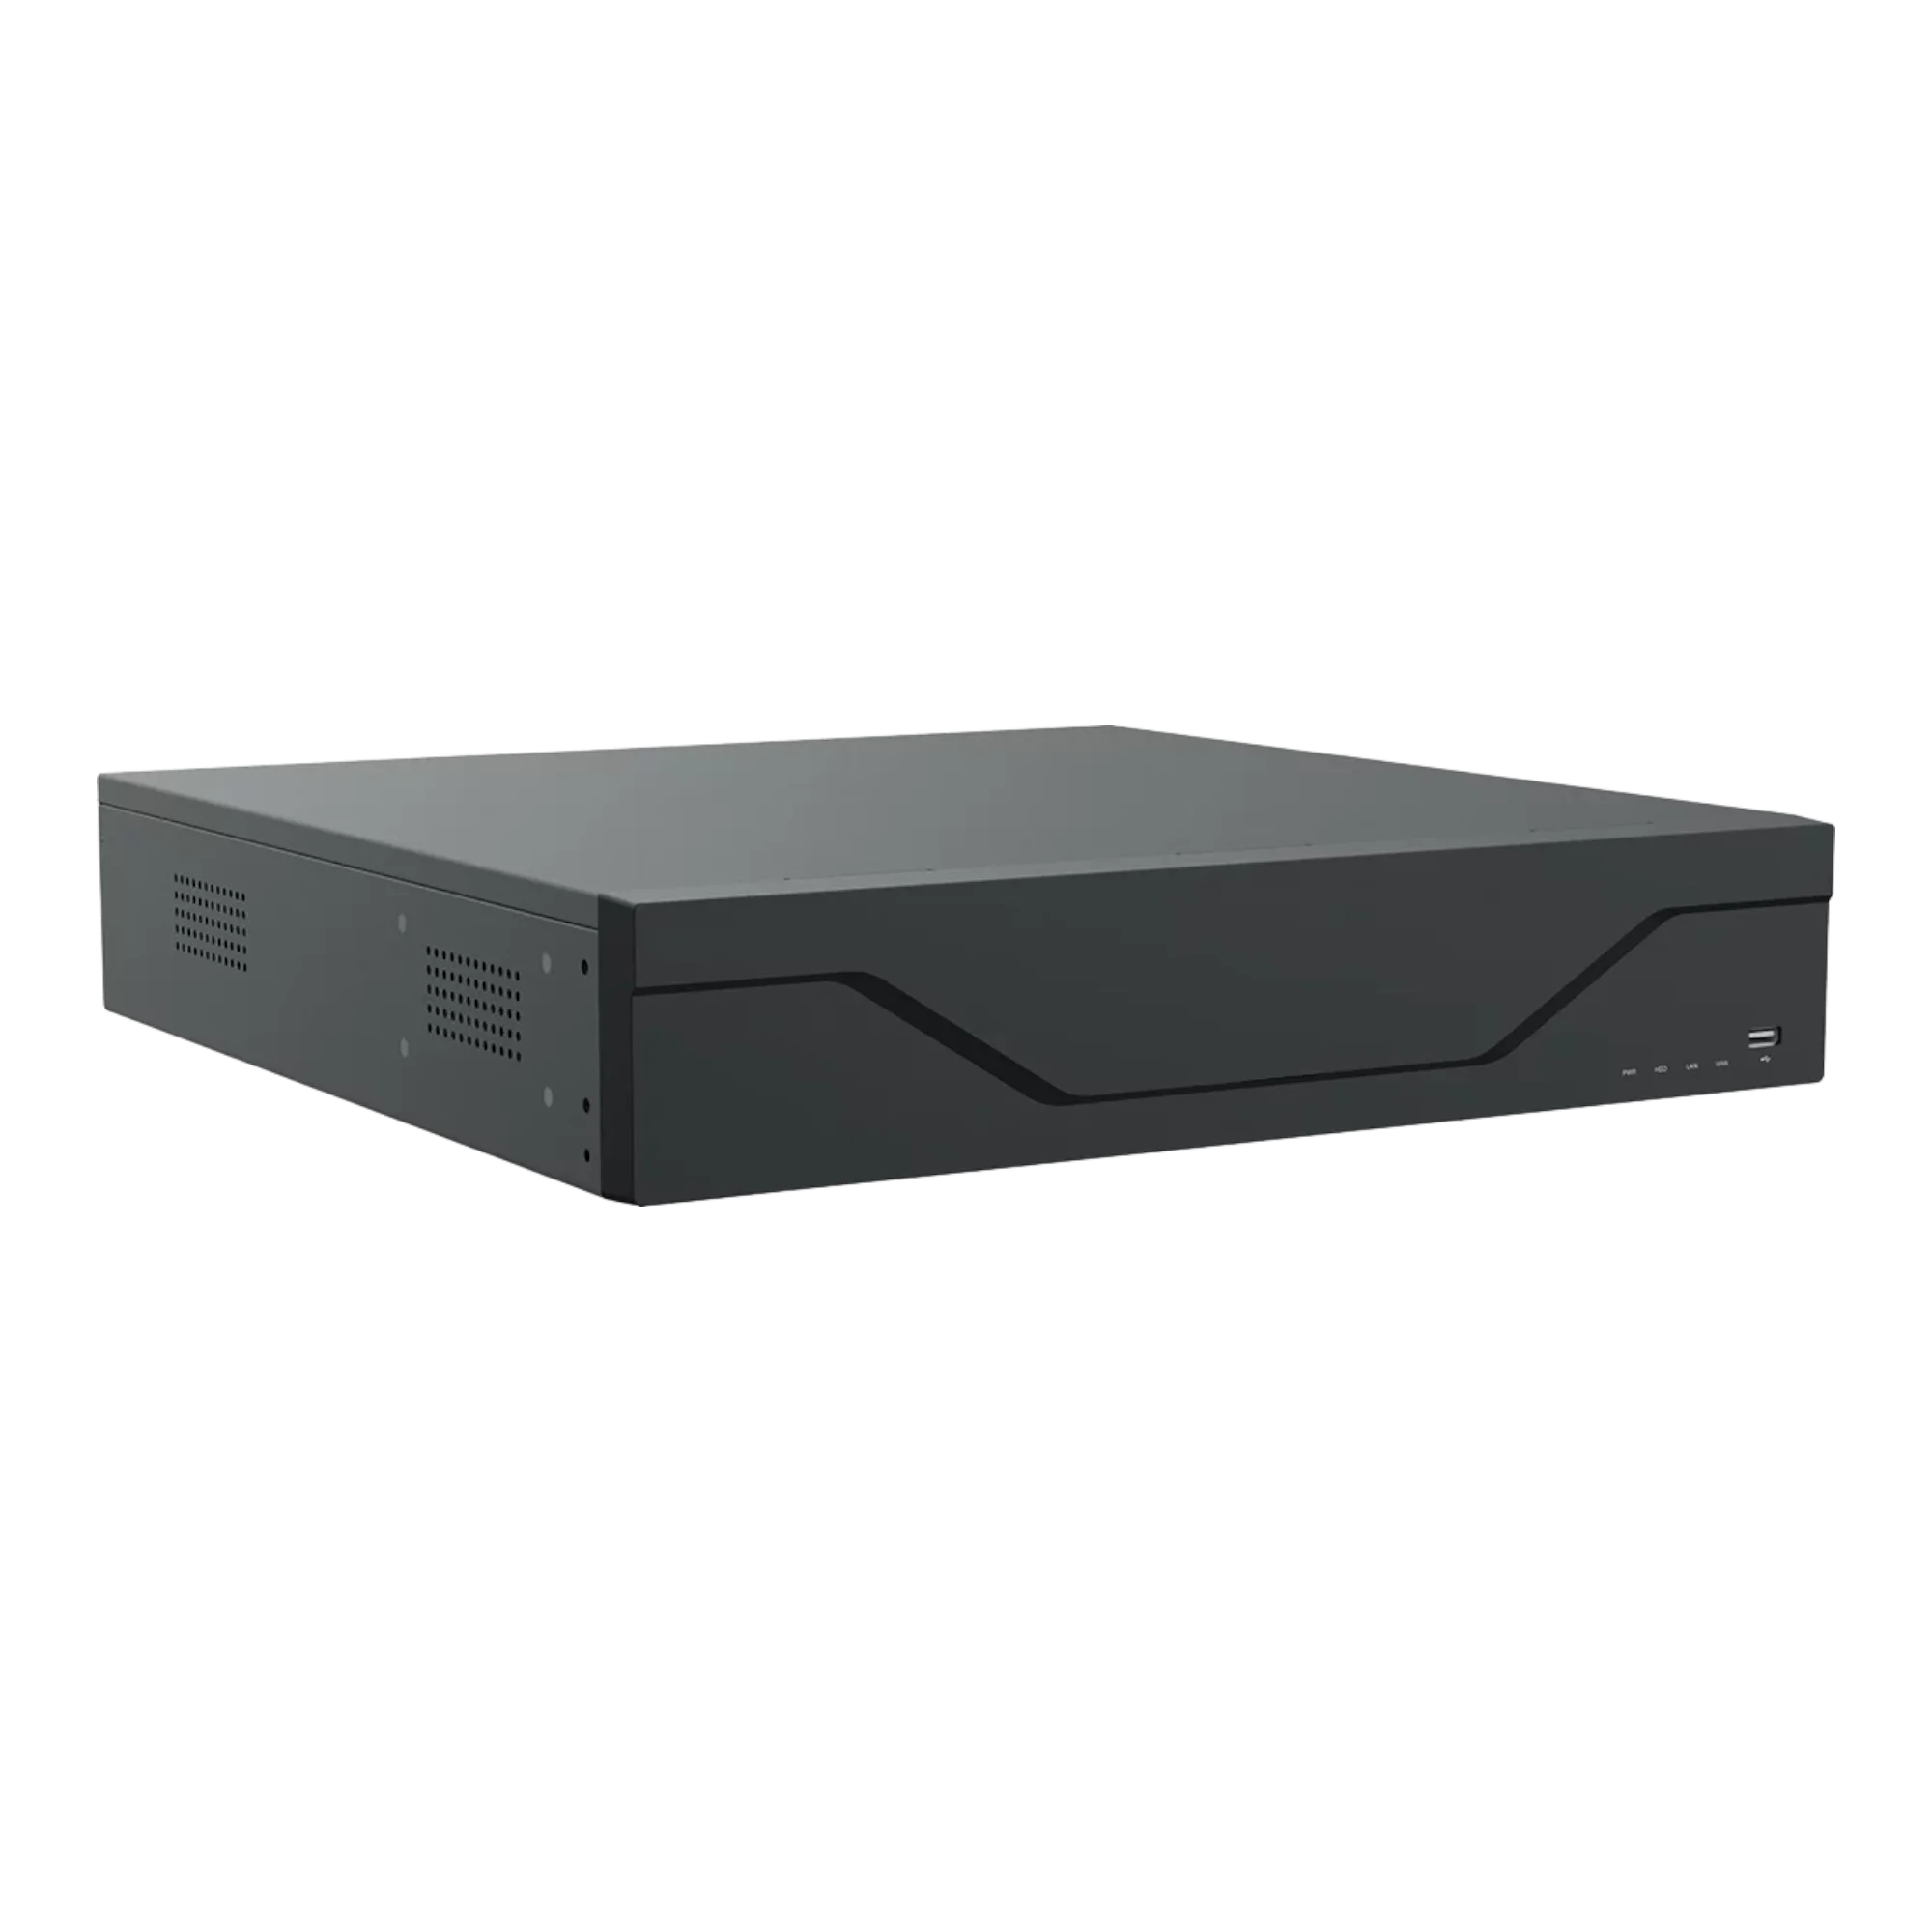 NVR Holowits NVR800-A01 8-Channel 1 Disc Network Recorder